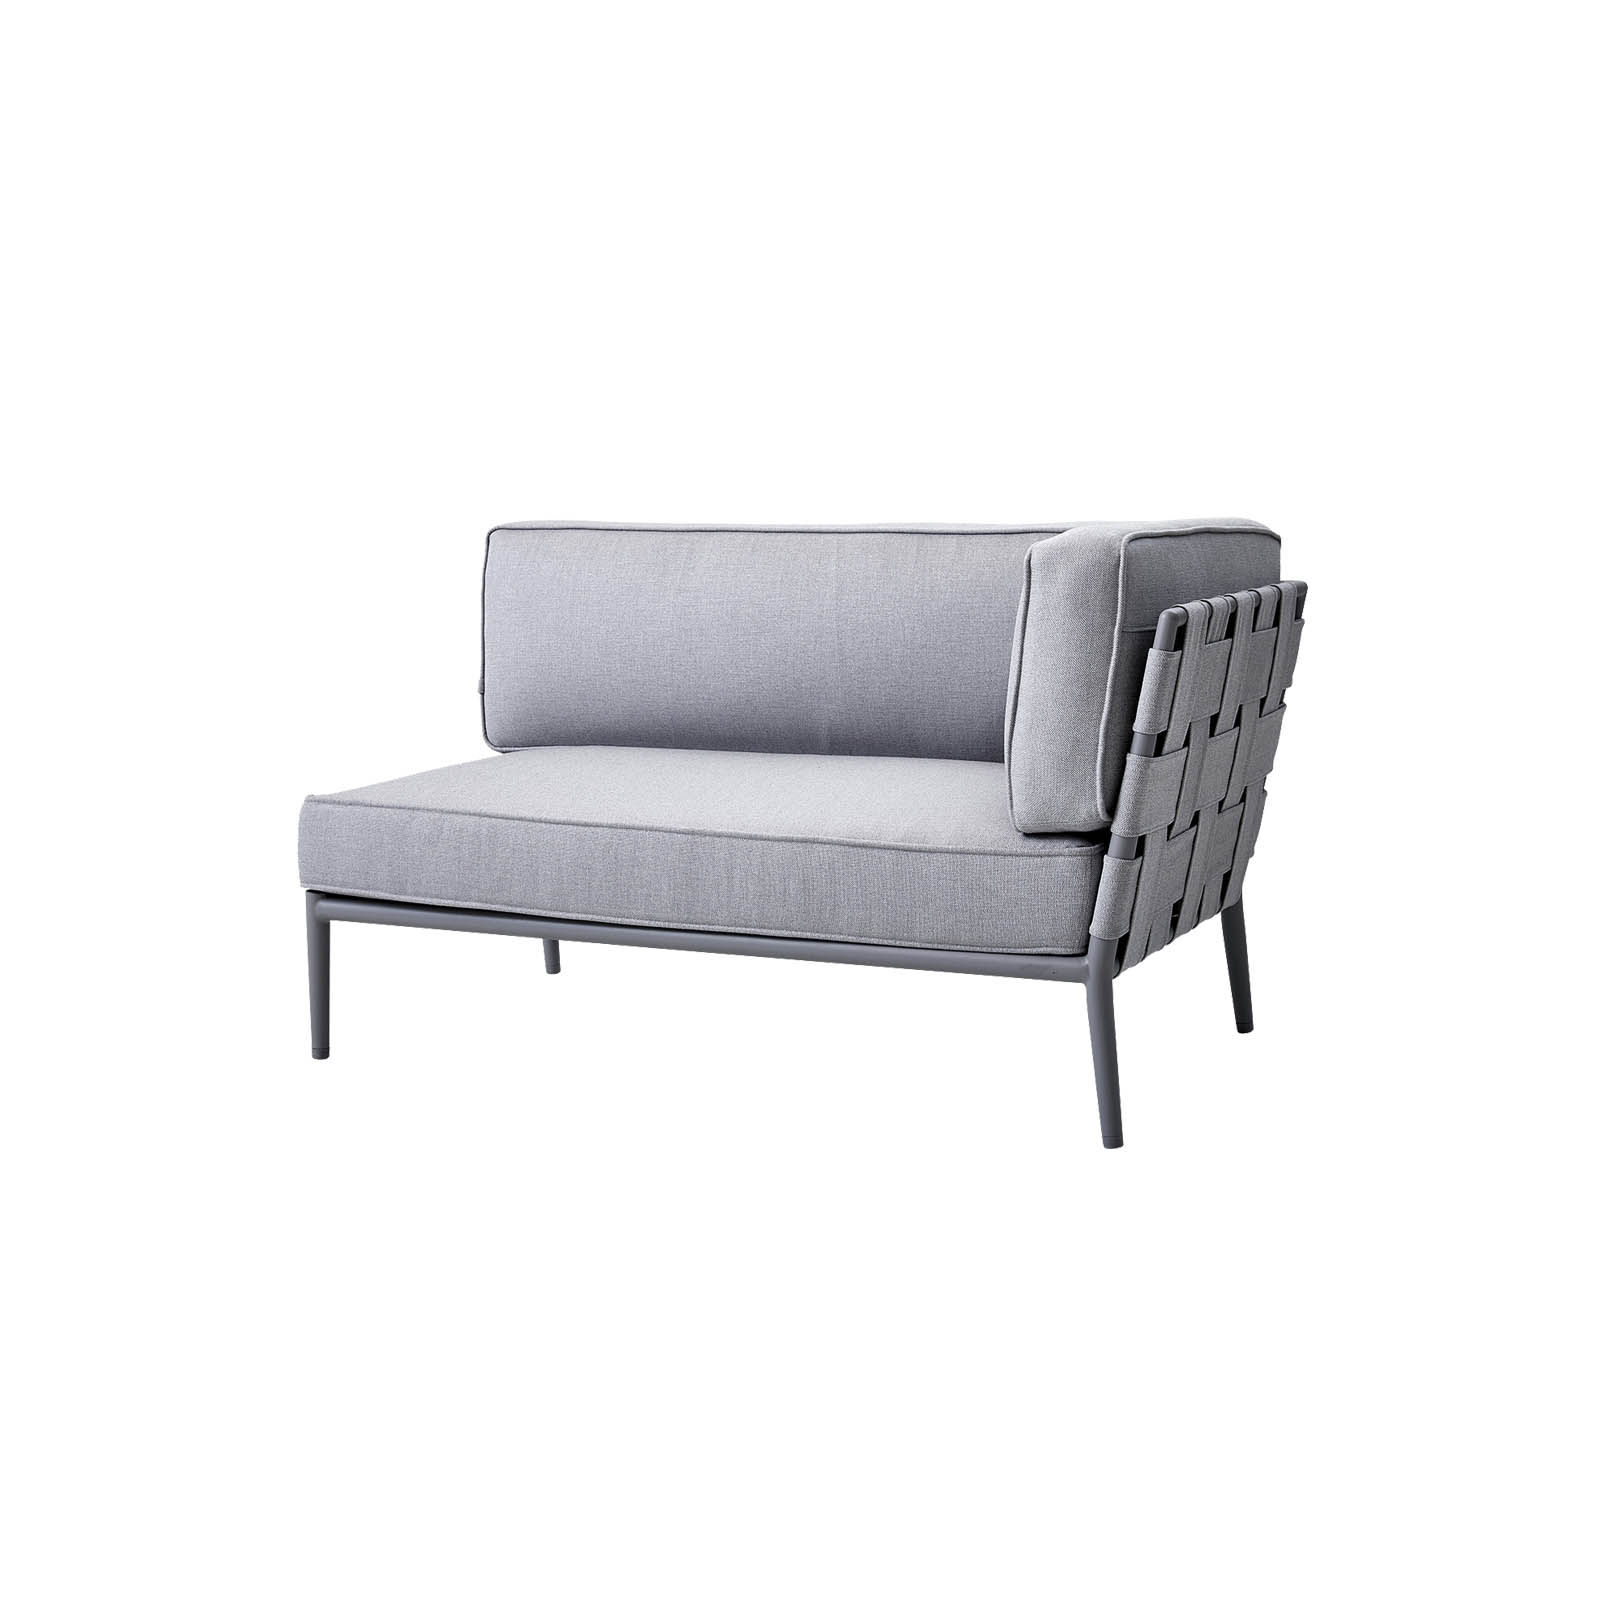 Conic 2-Sitzer Sofa-Modul links aus Cane-line AirTouch mit QuickDry in Light Grey